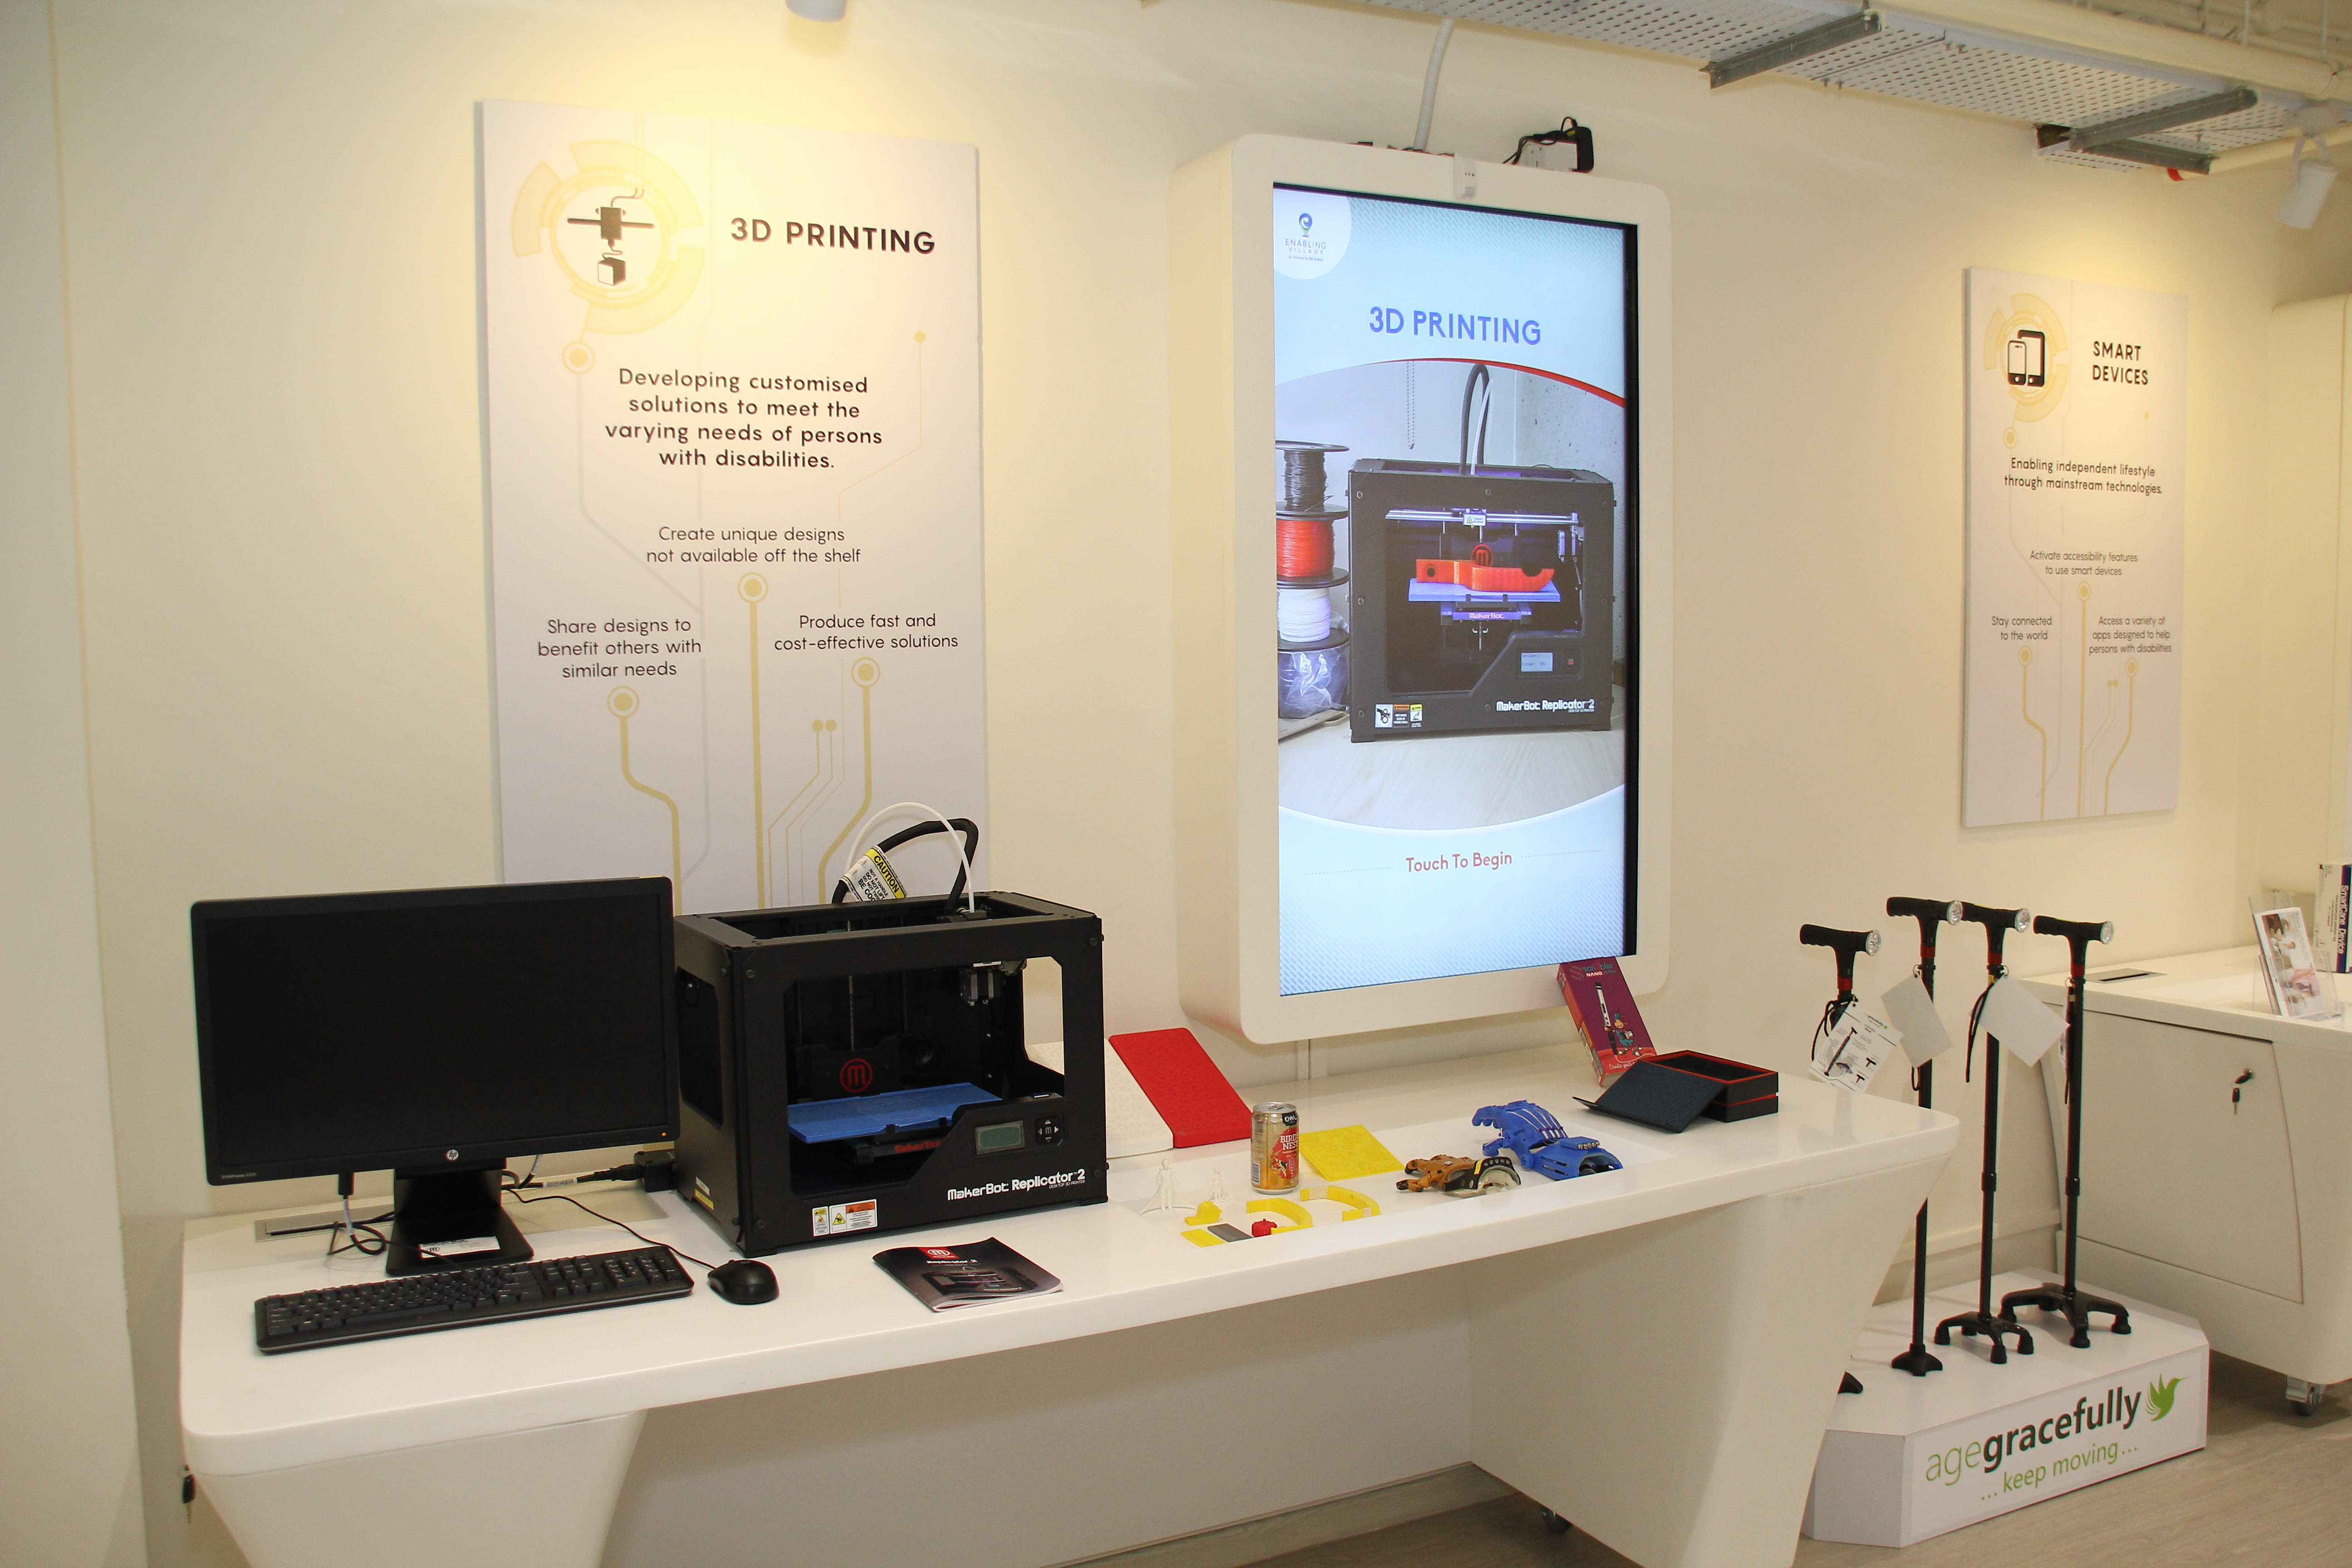 Play and Innovation Zone with the 3D printing showcase